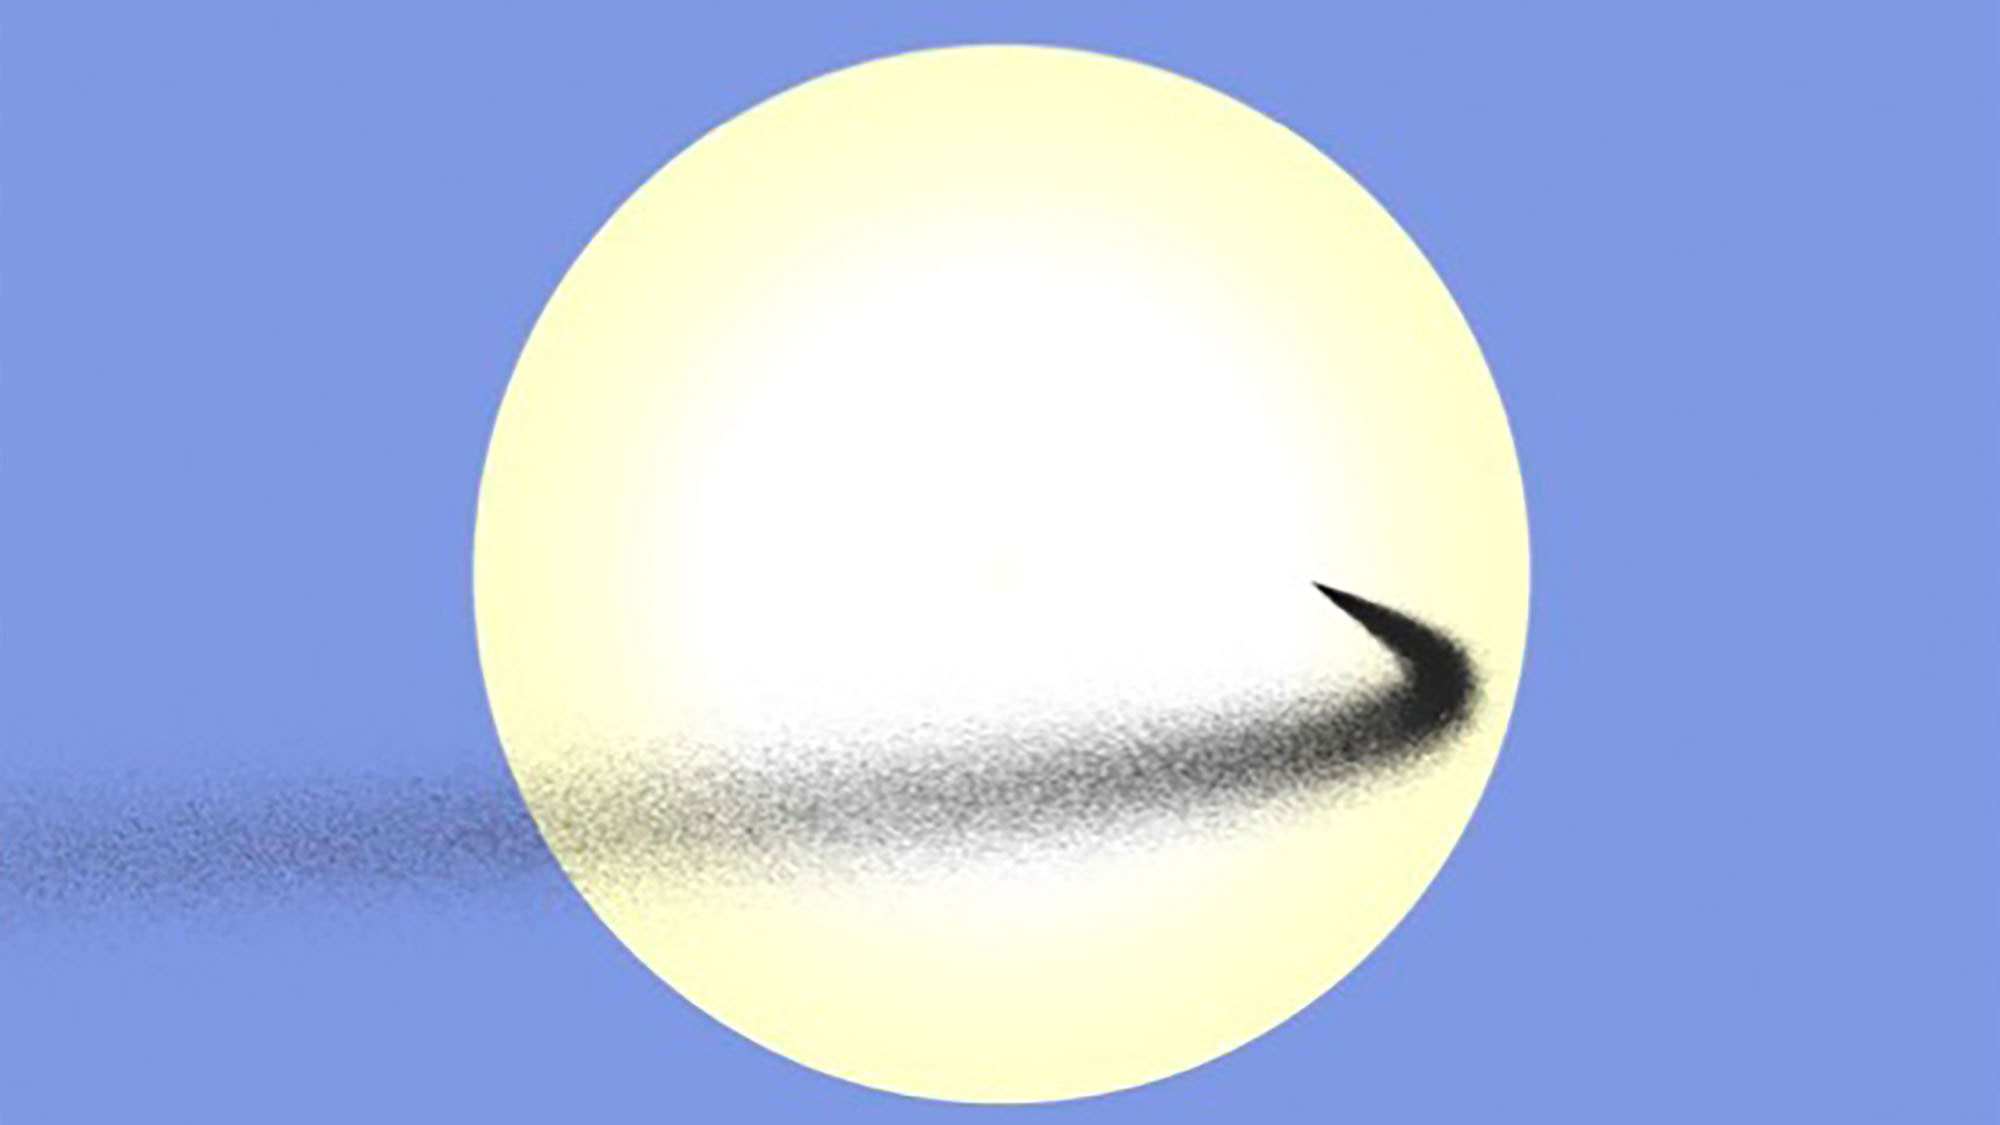 Simulated stream of dust launched between Earth and the Sun. This dust cloud is shown as it crosses the disk of the Sun, viewed from Earth. Streams like this one, including those launched from the Moon’s surface, can act as a temporary sunshade.